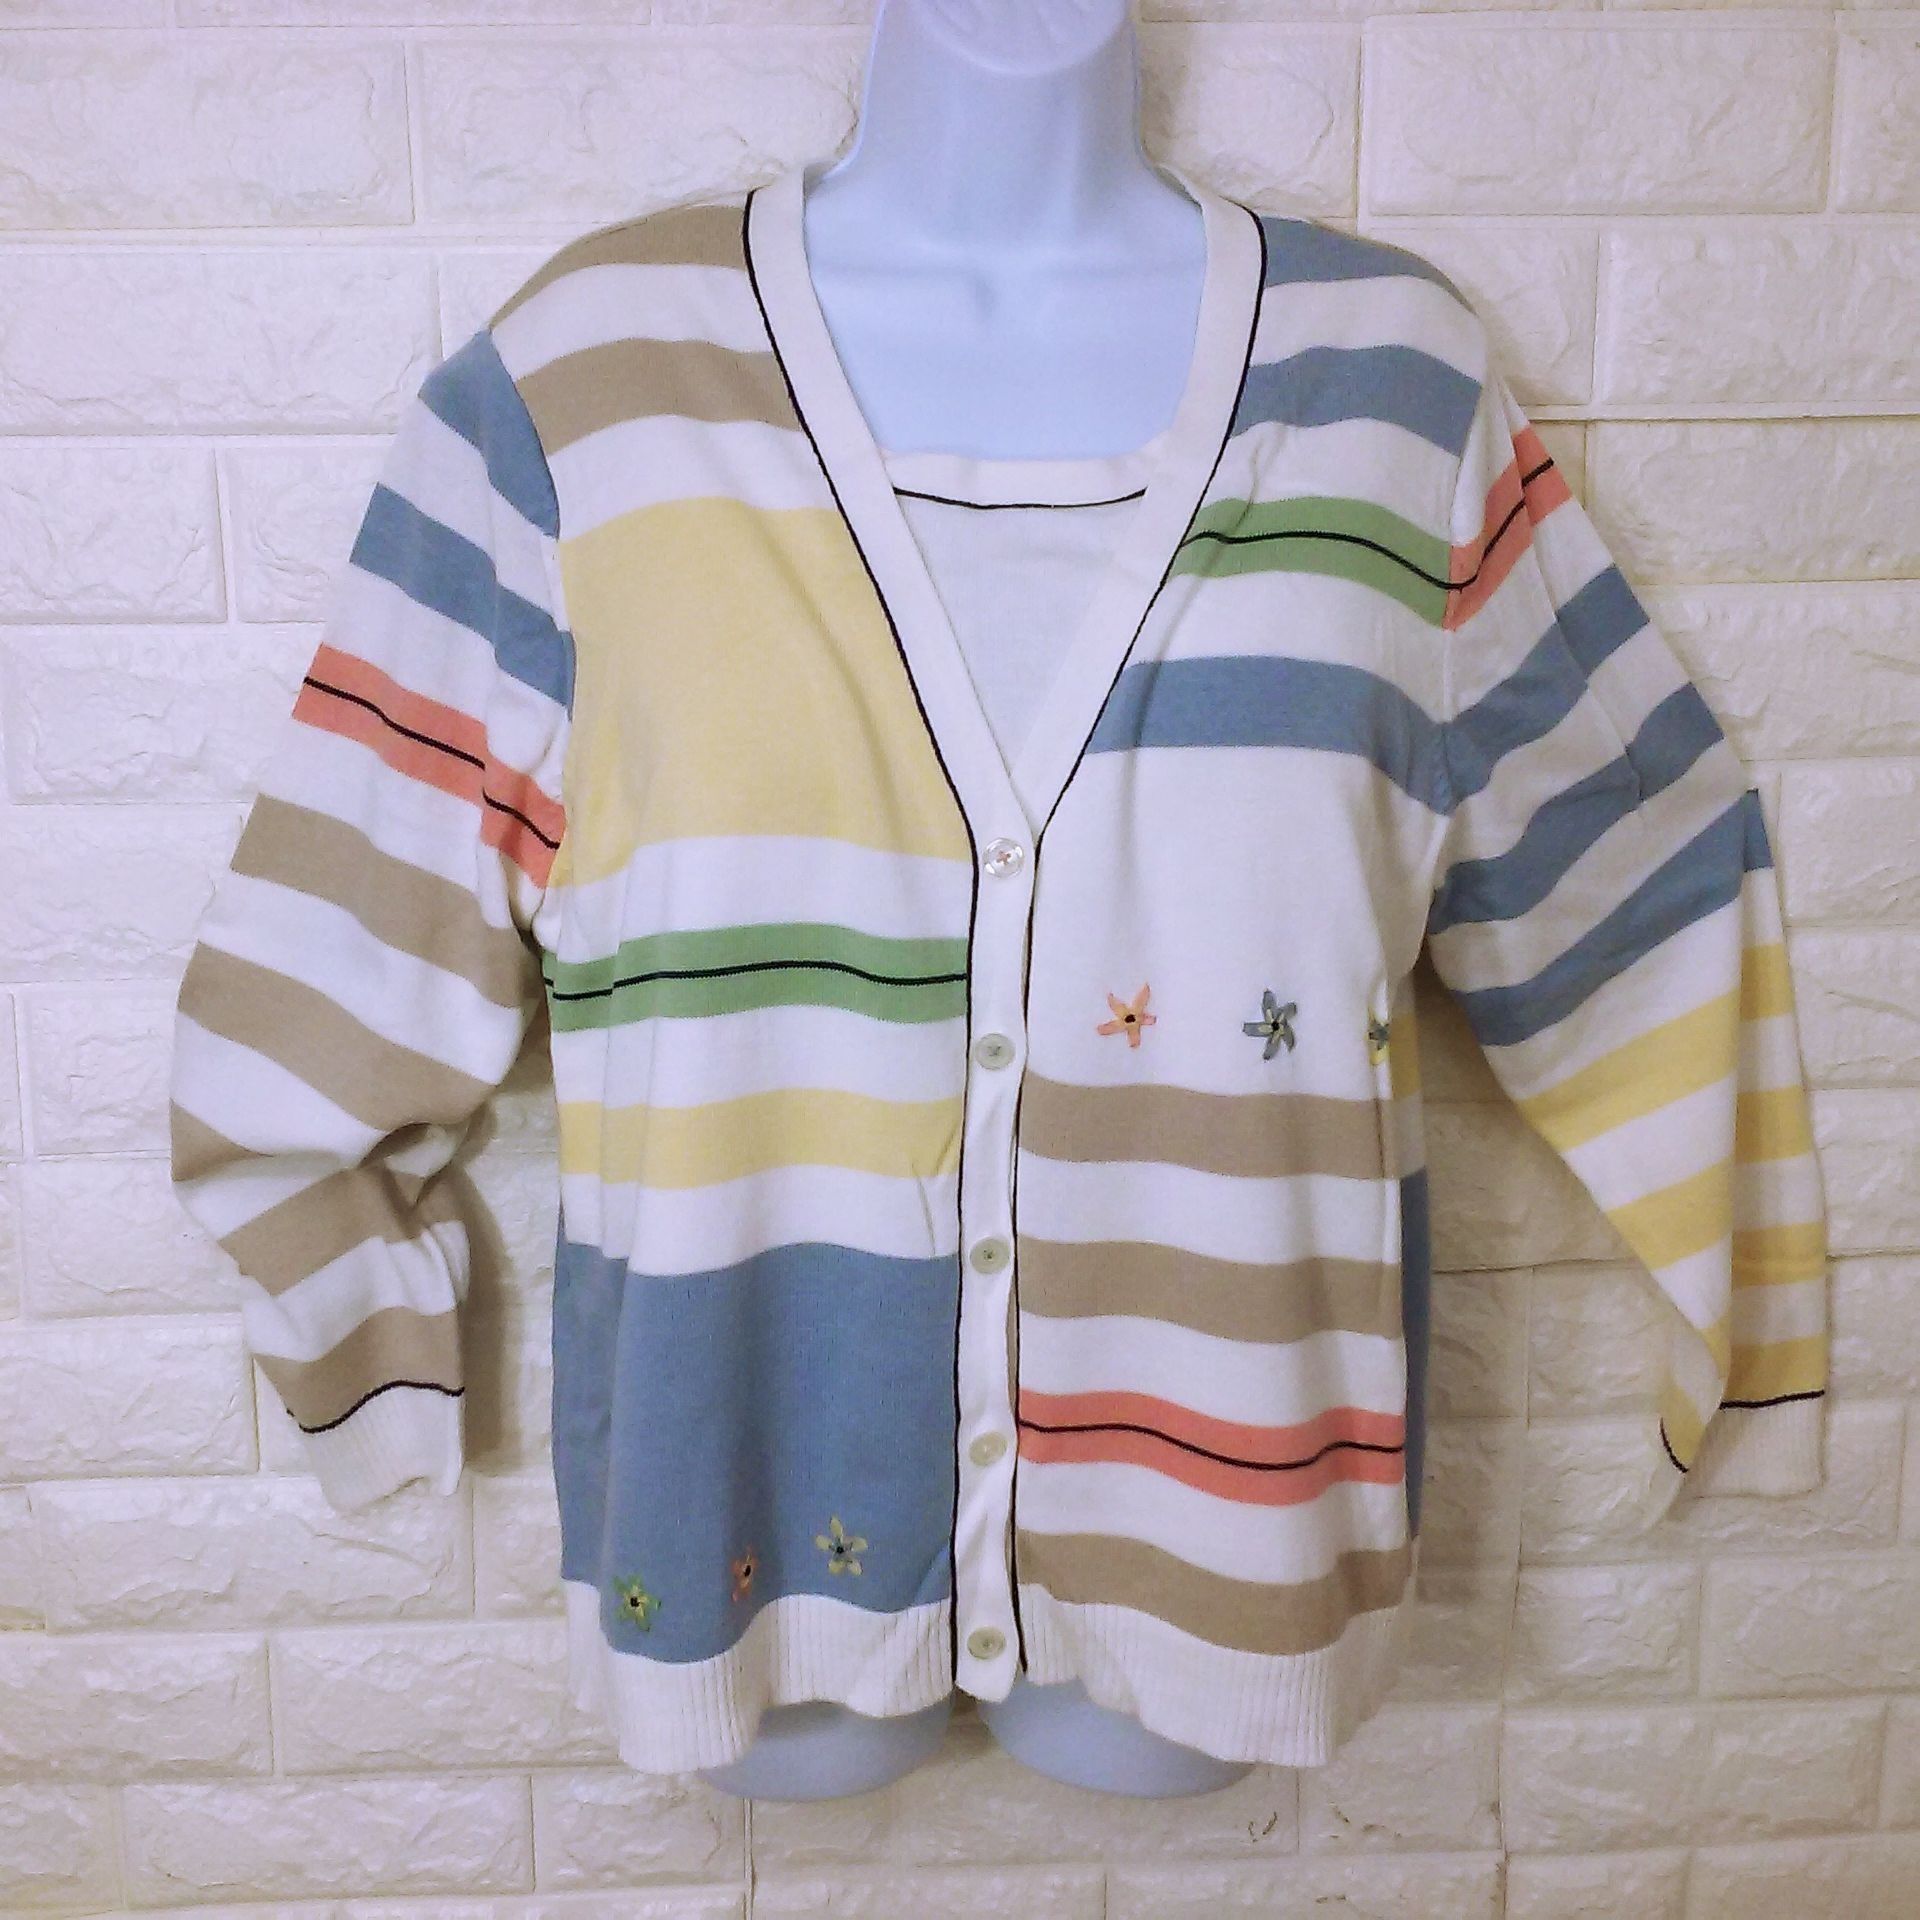 Vintage 90s Koret Knit Cardigan Top Novelty Sweater Striped Classic Size L / US 10 / IT 46 - 1 Preview